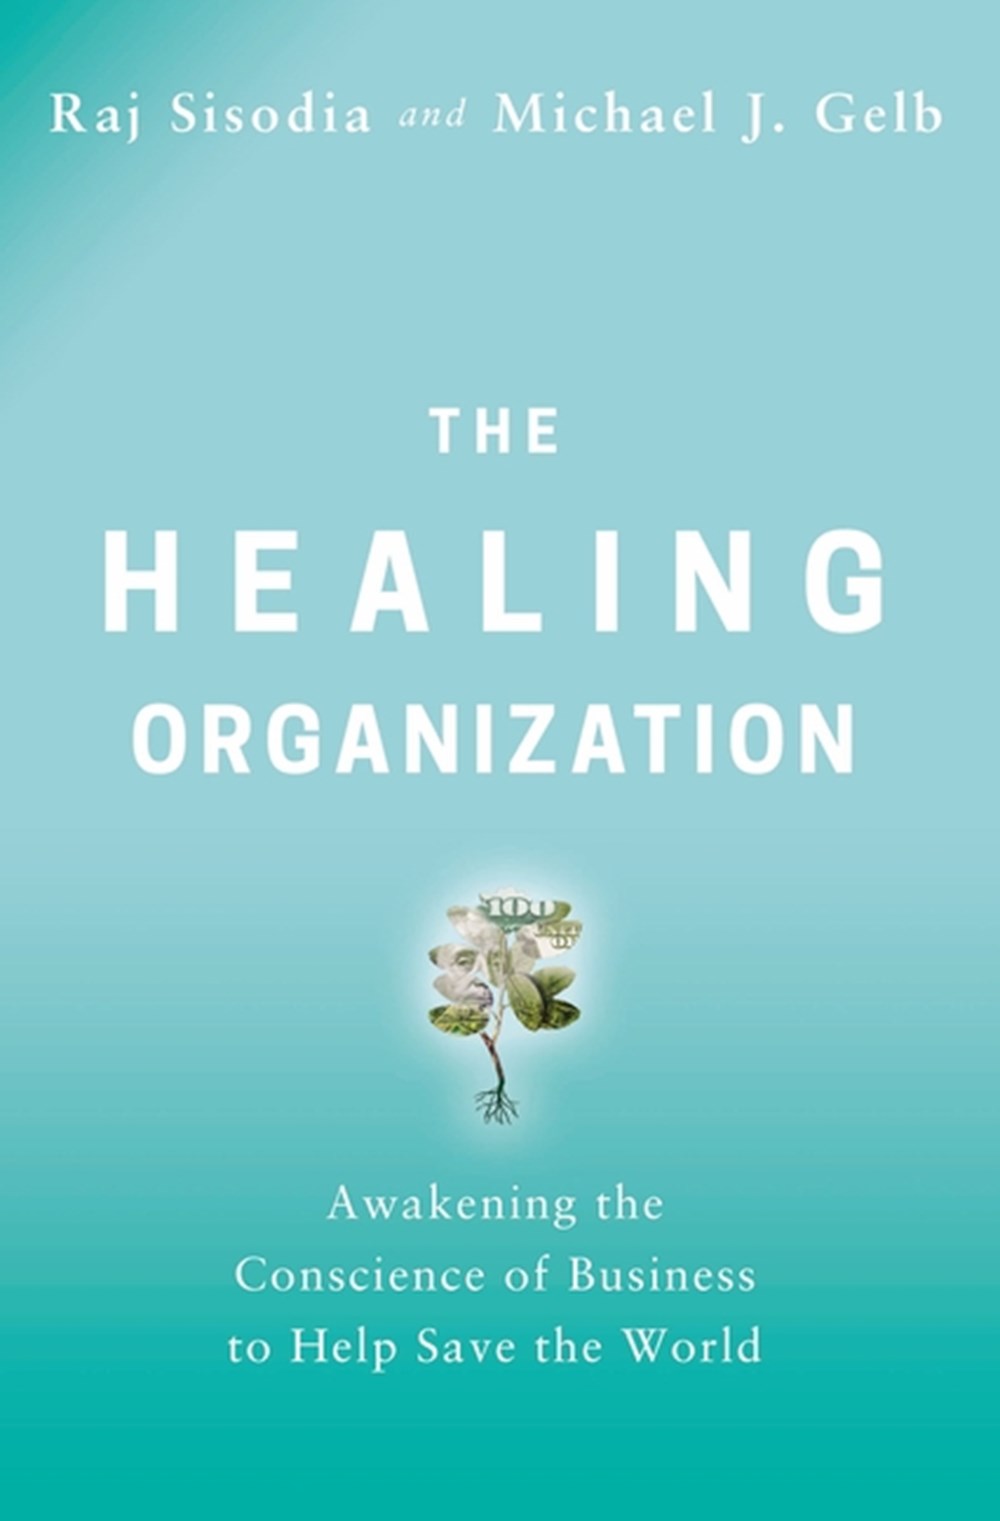 Healing Organization Awakening the Conscience of Business to Help Save the World